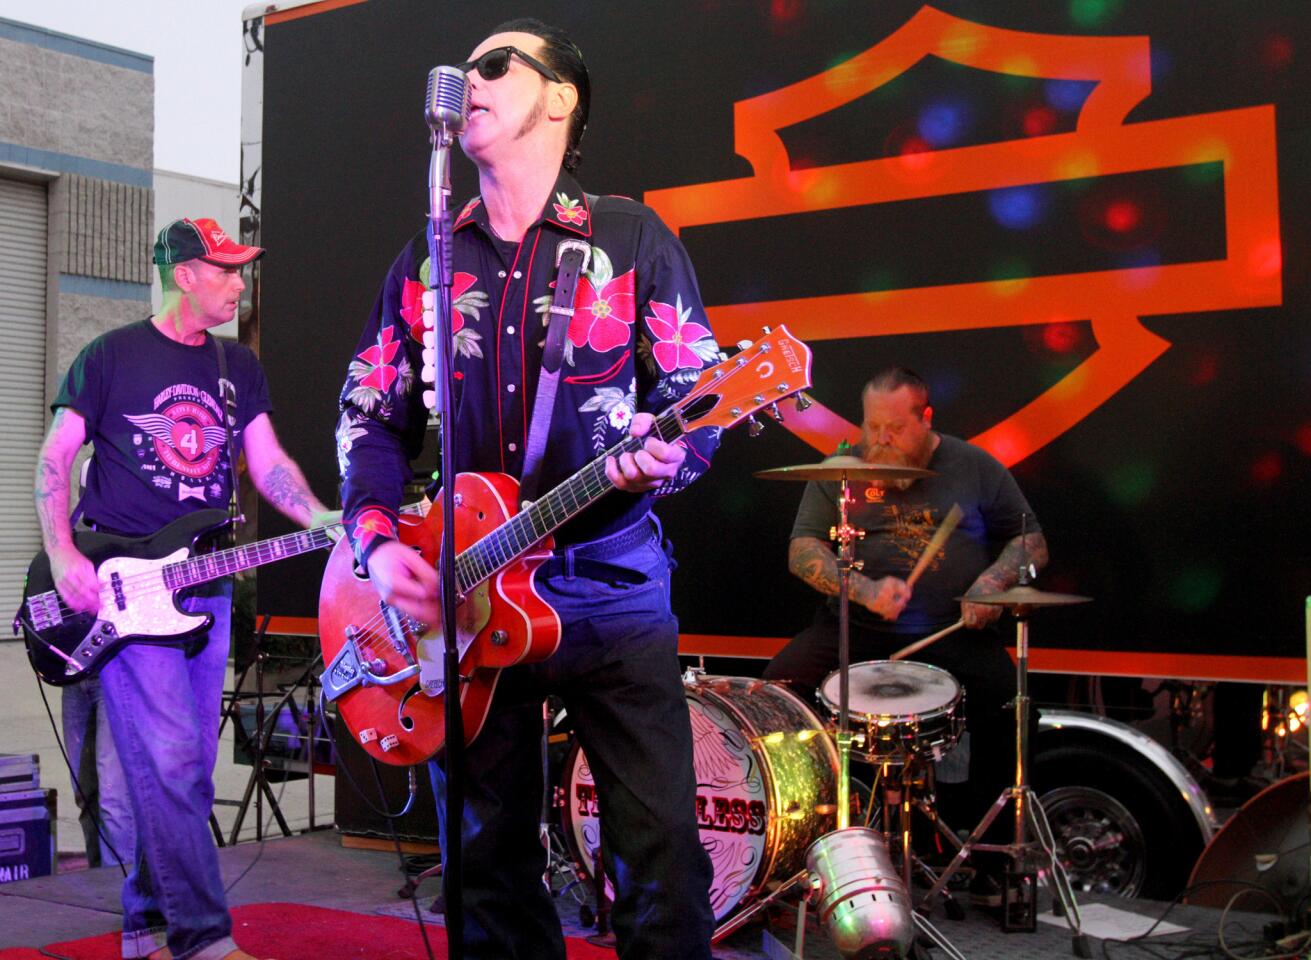 The Loveless lead singer Ernie Snair rocks the crowd gathered for the Pre-Love Ride Block Party at the Harley-Davidson Motorcycles store in Glendale on Friday, October 16, 2015. The 32nd and final Love Ride will be on Sunday.